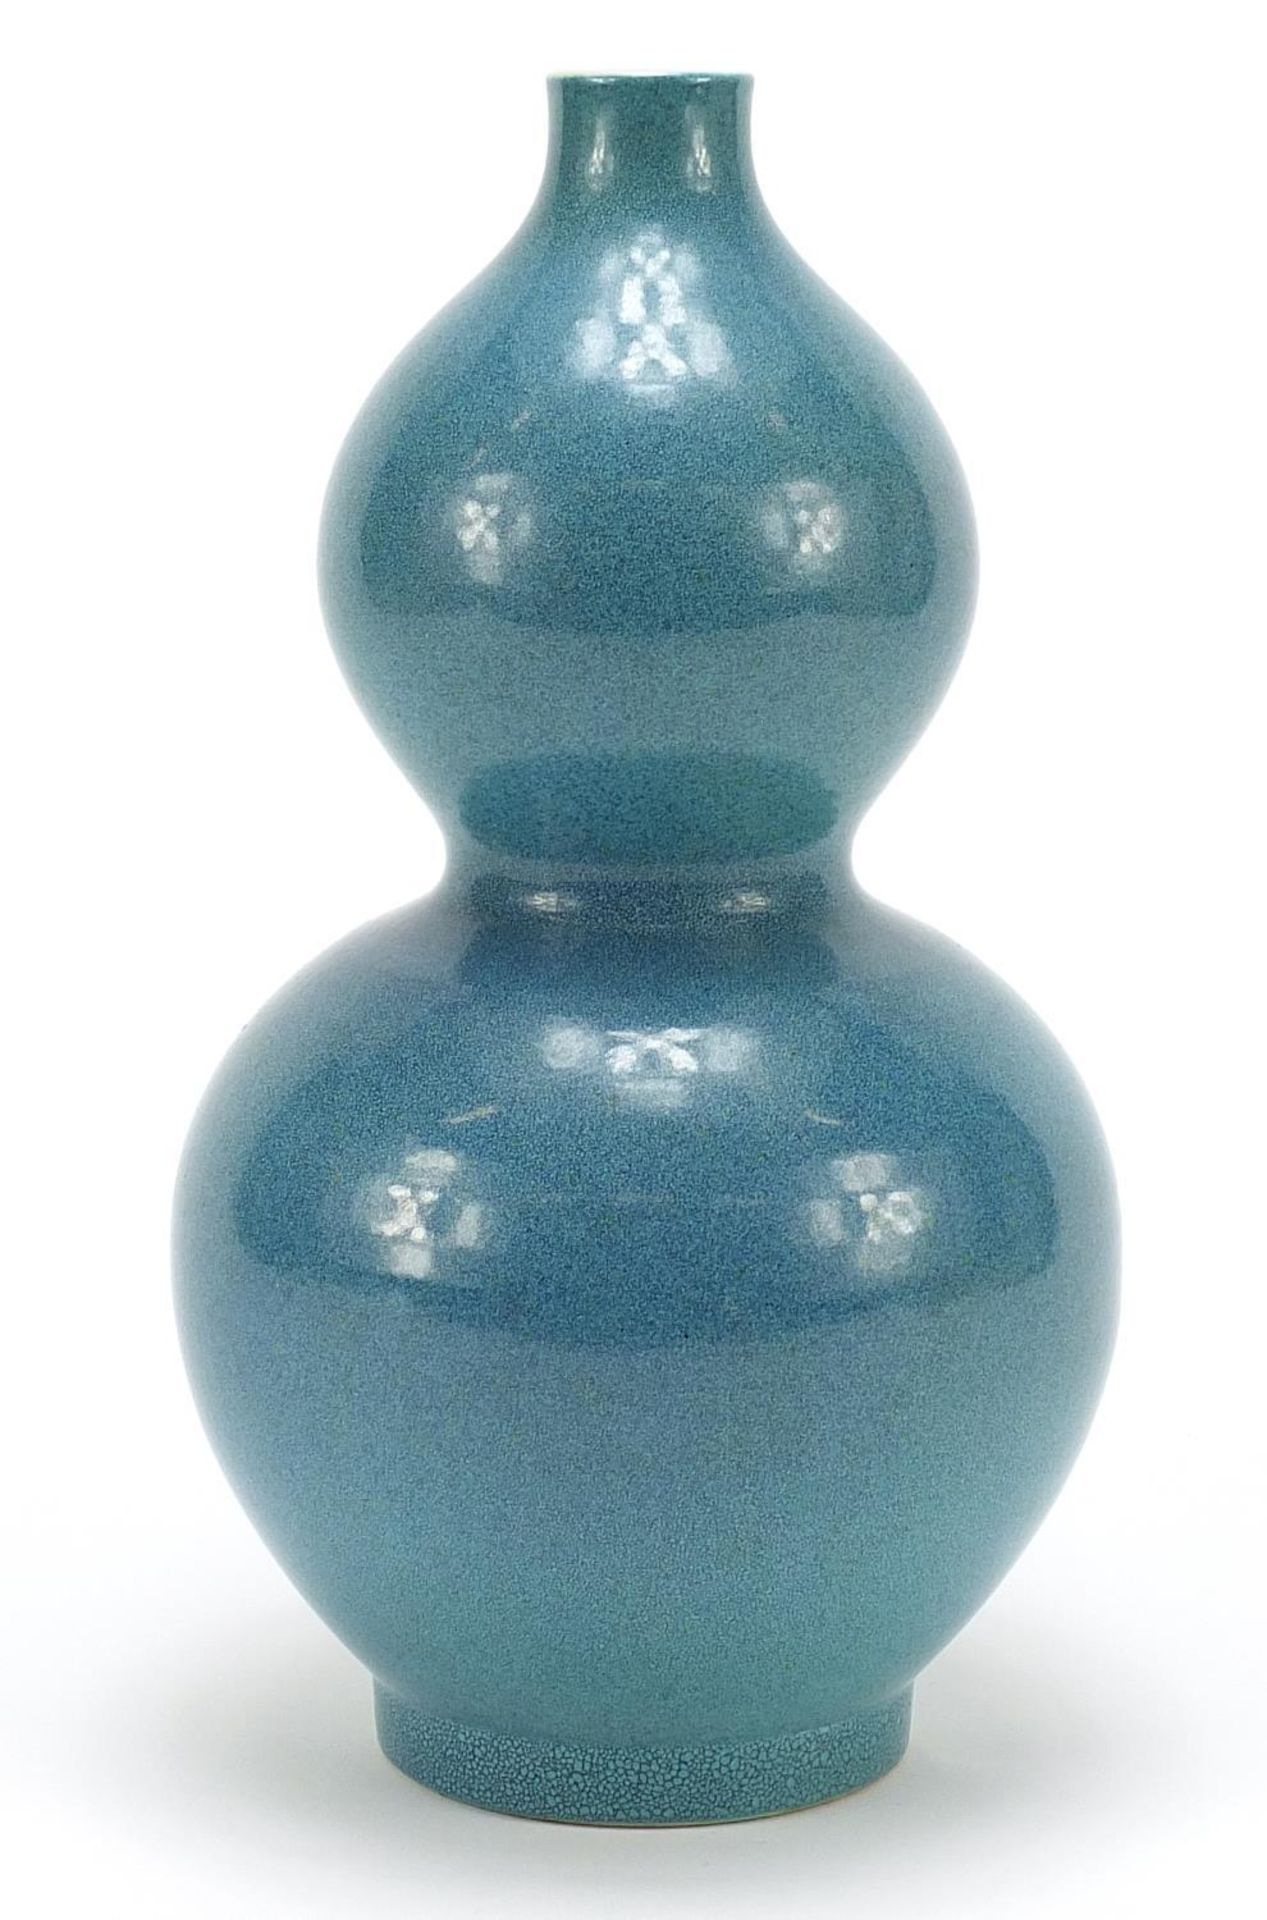 Chinese porcelain double gourd vase having a spotted turquoise glaze, 25.5cm high - Image 4 of 7